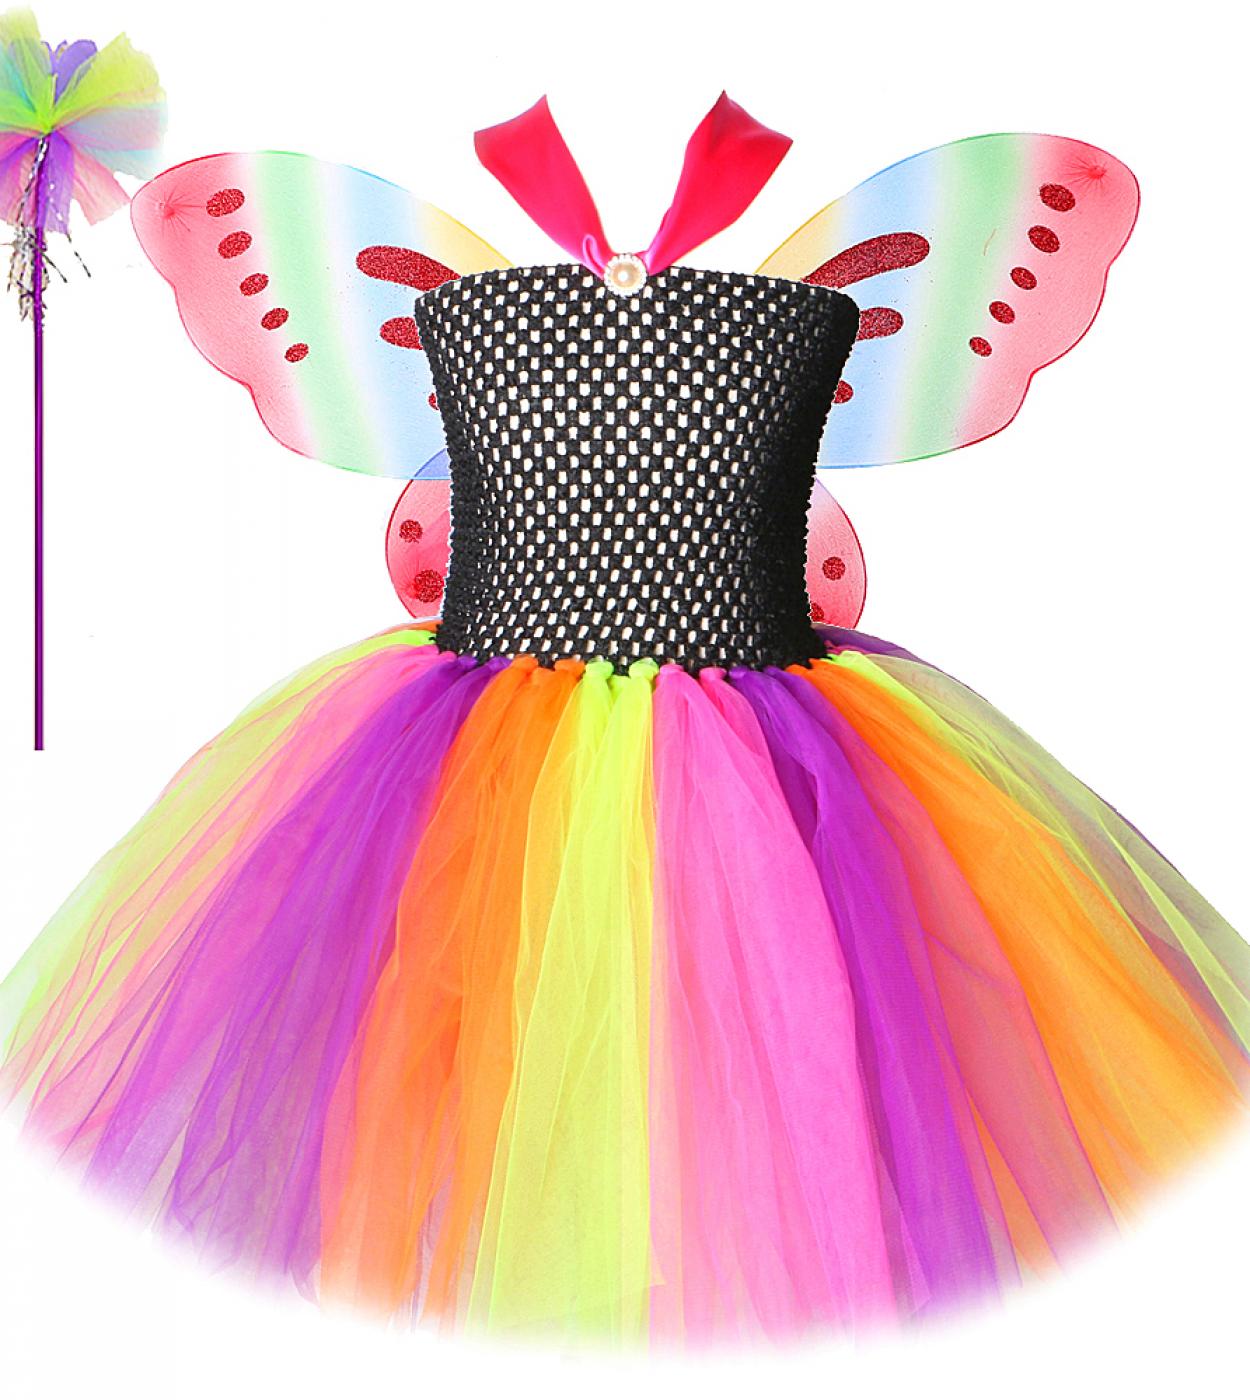 Rainbow Fairy Tutu Dress Outfit For Girls Halloween Party Costumes For Kids Fancy Princess Dresses With Butterfly Wings 